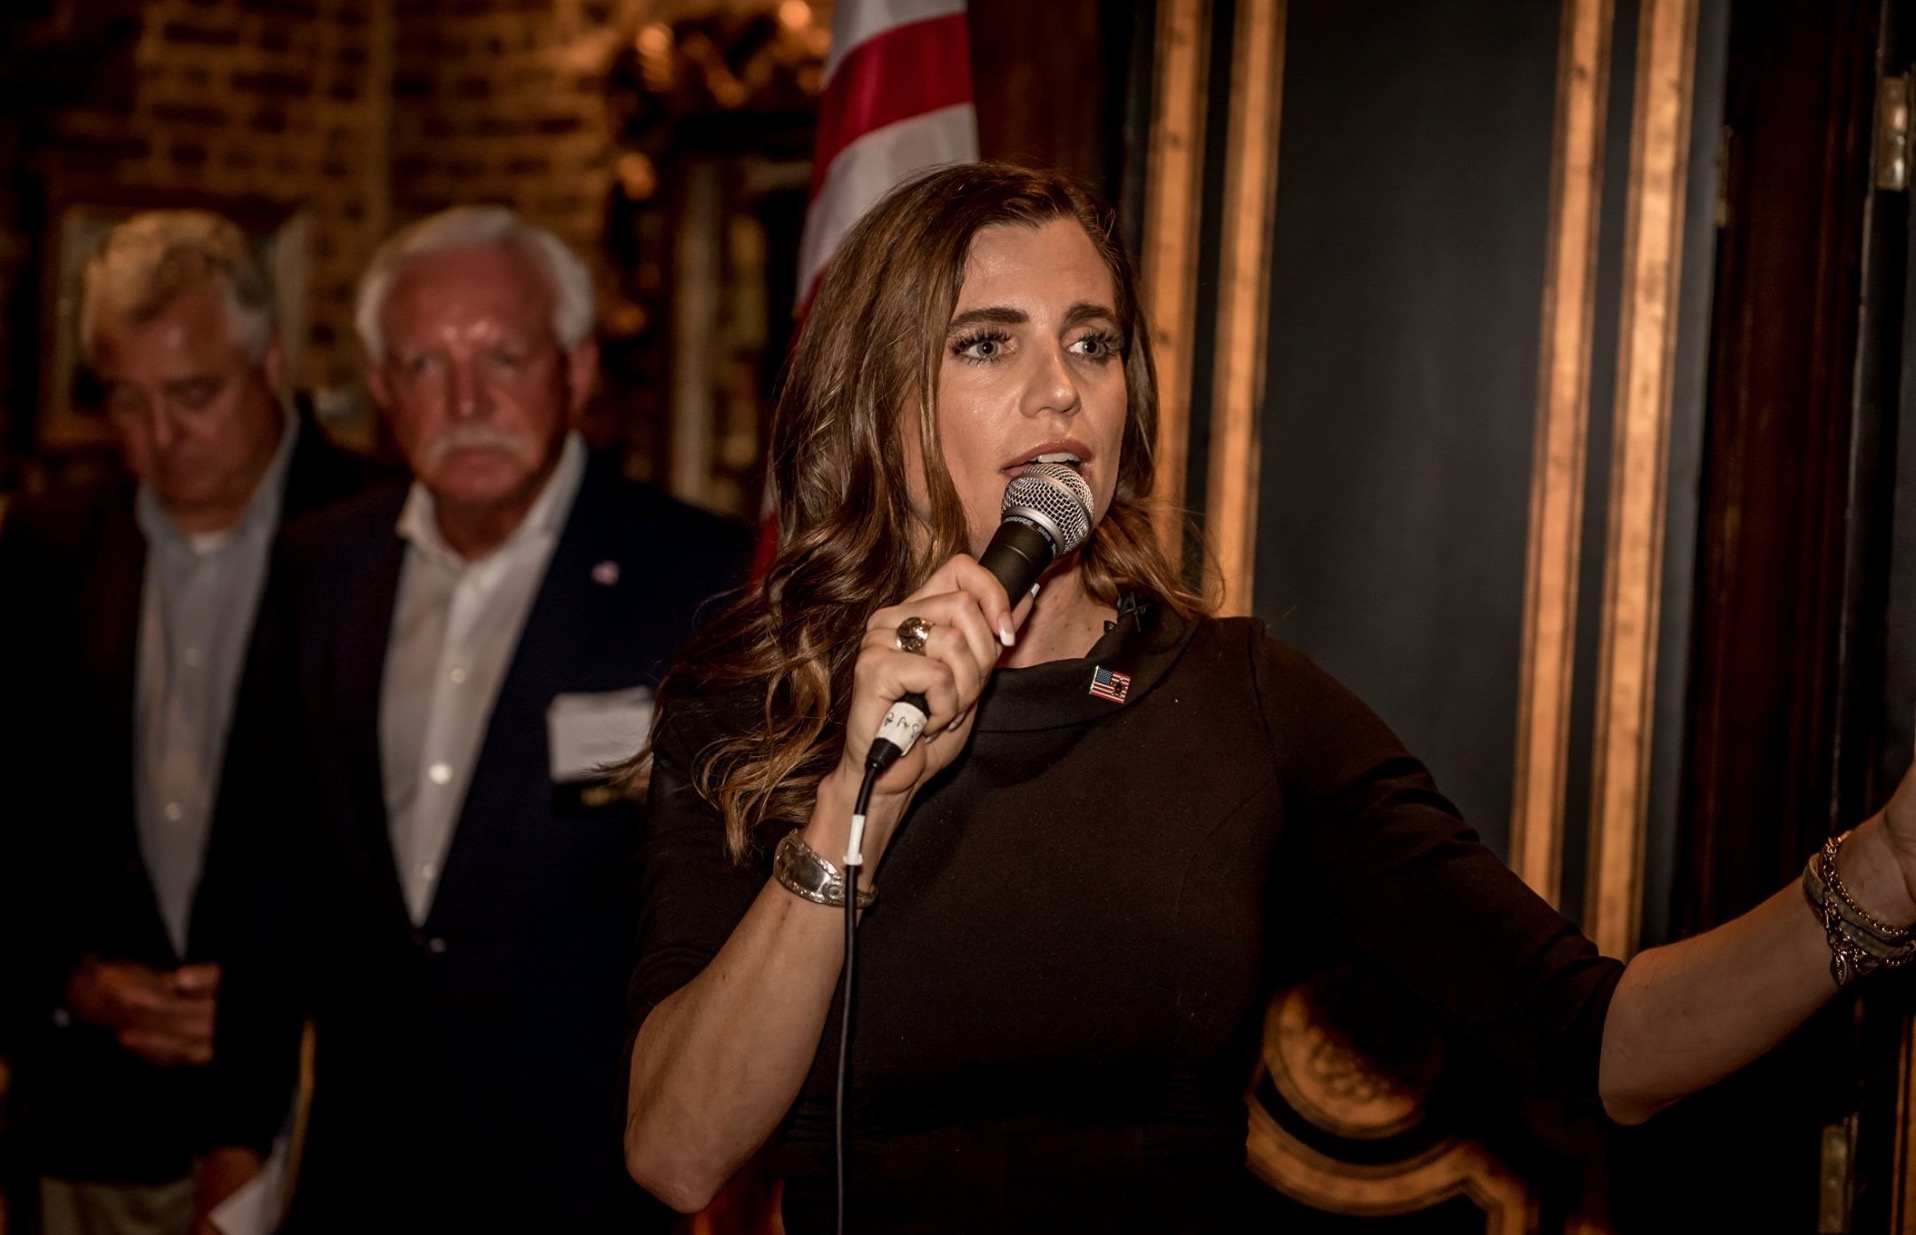 SC first congressional district candidate Nancy Mace